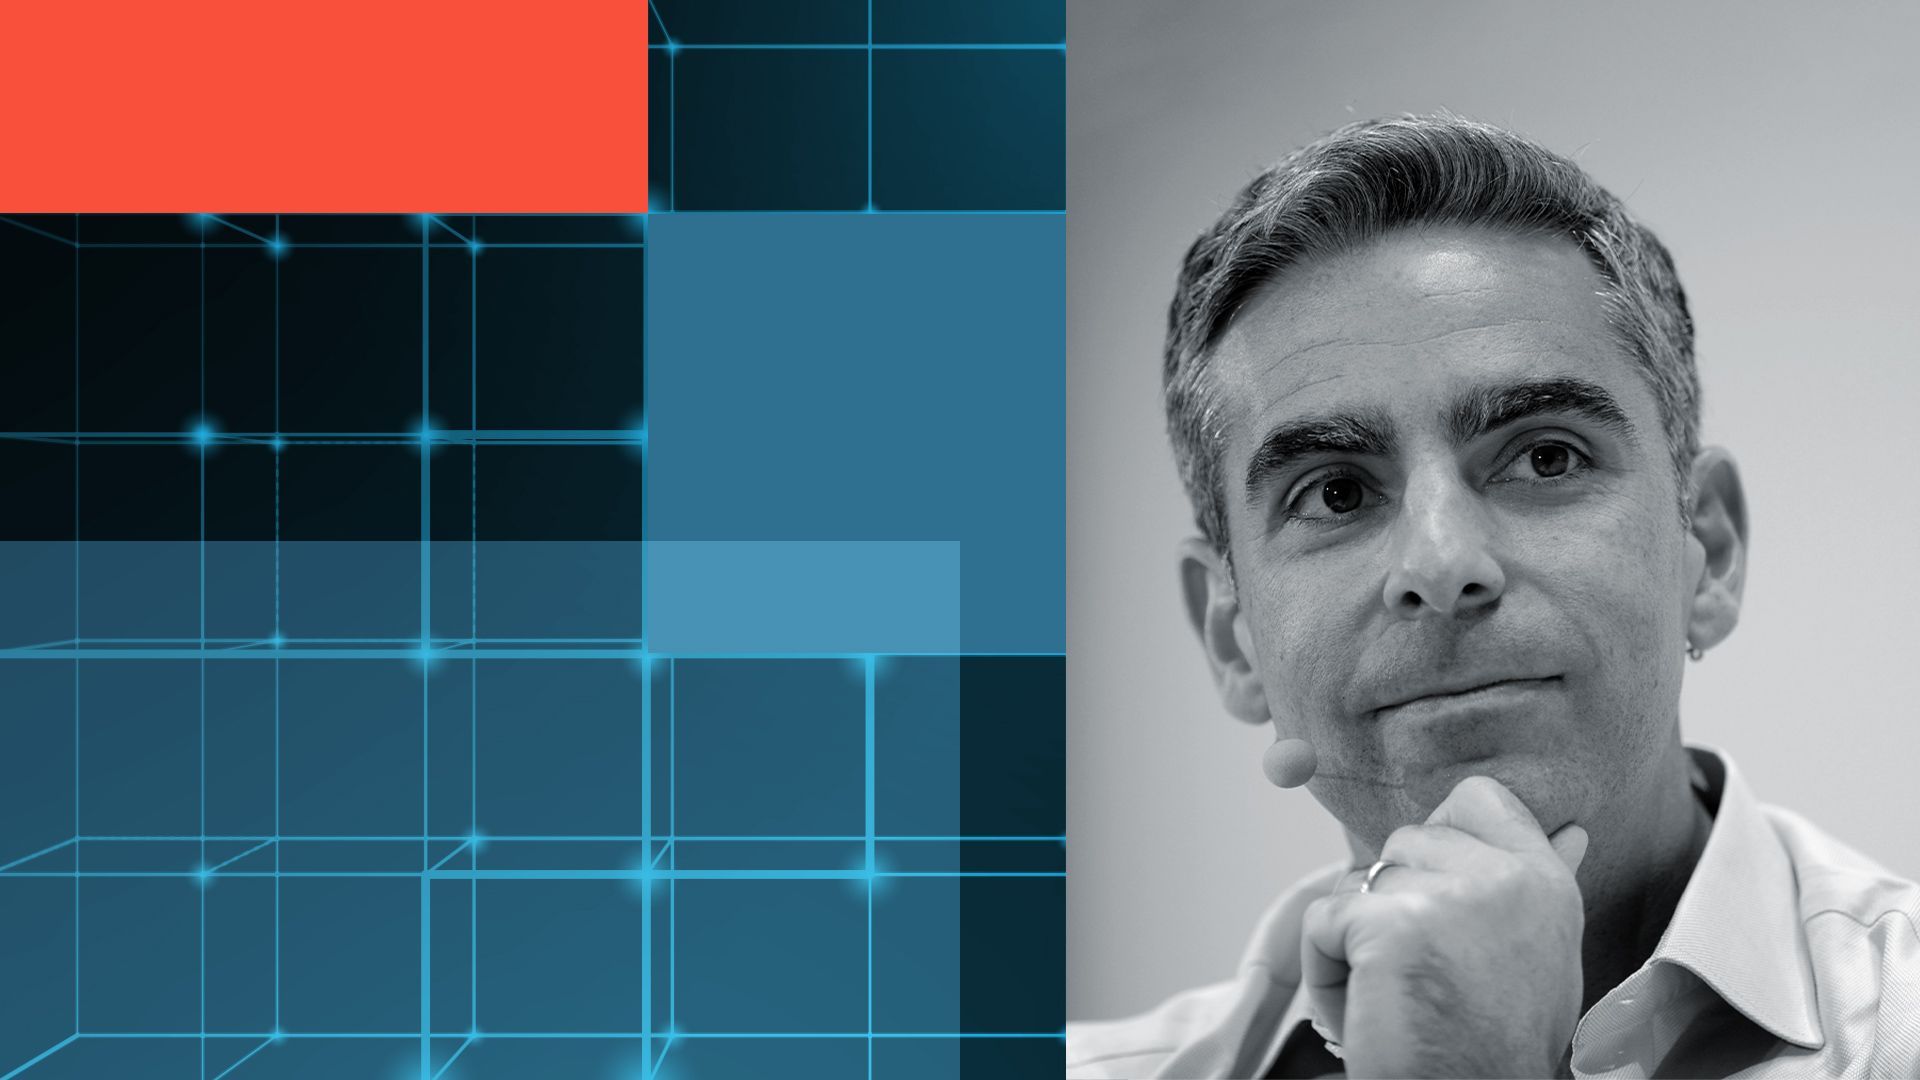 Photo illustration of David Marcus surrounded by abstract shapes and a digital grid.